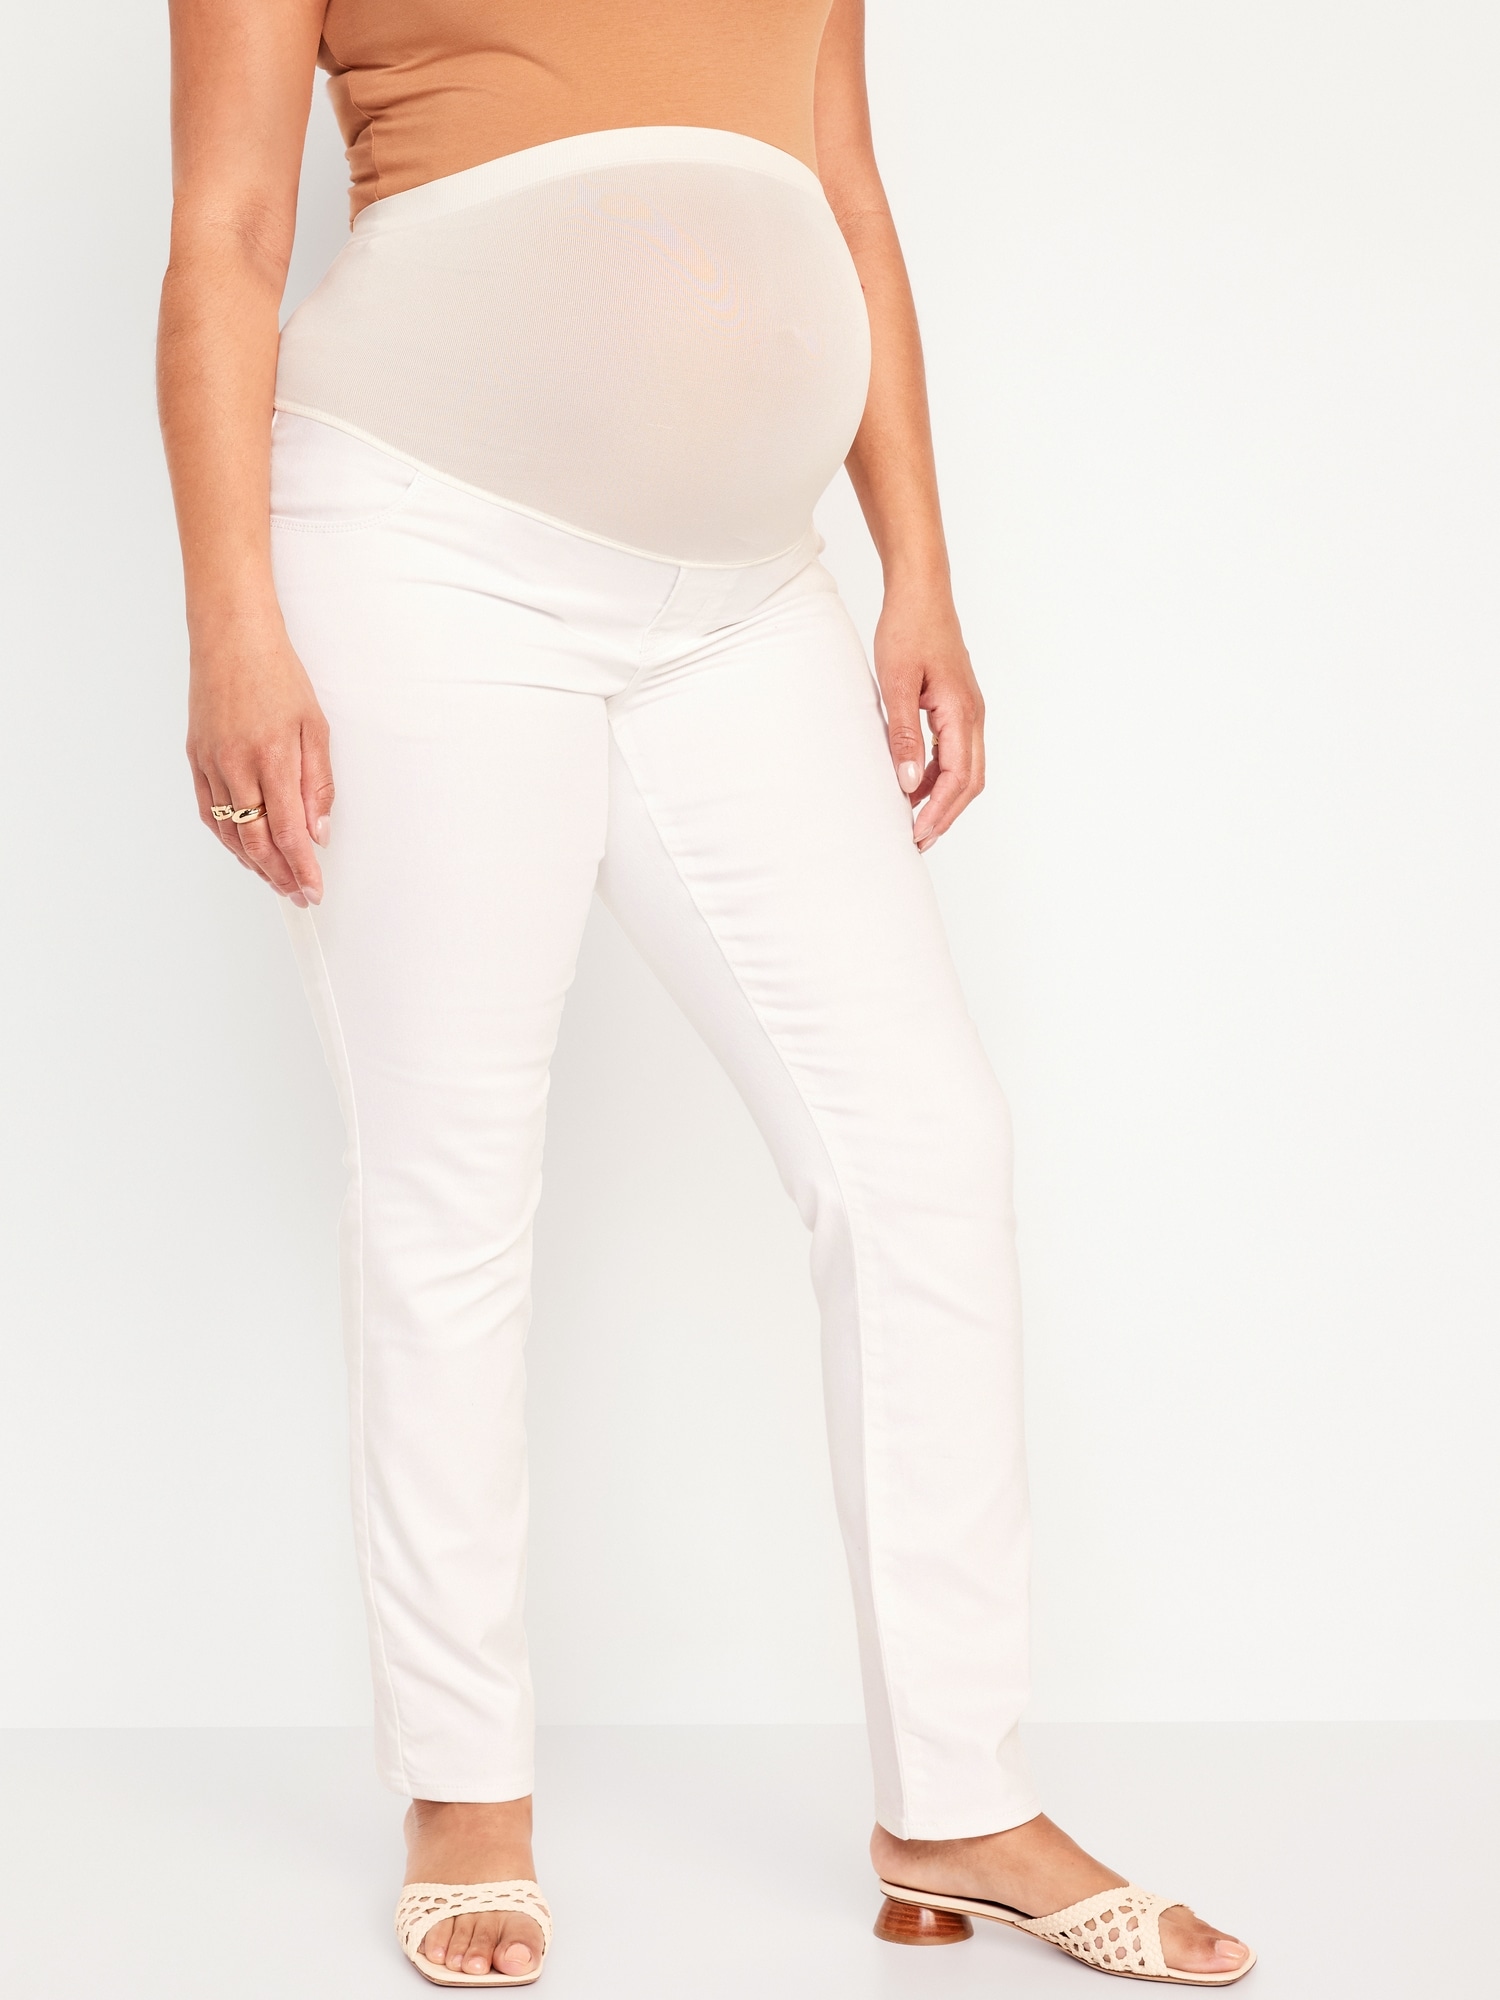 gvdentm Maternity Pants Women's Twill Jogger Pants - Casual Casual